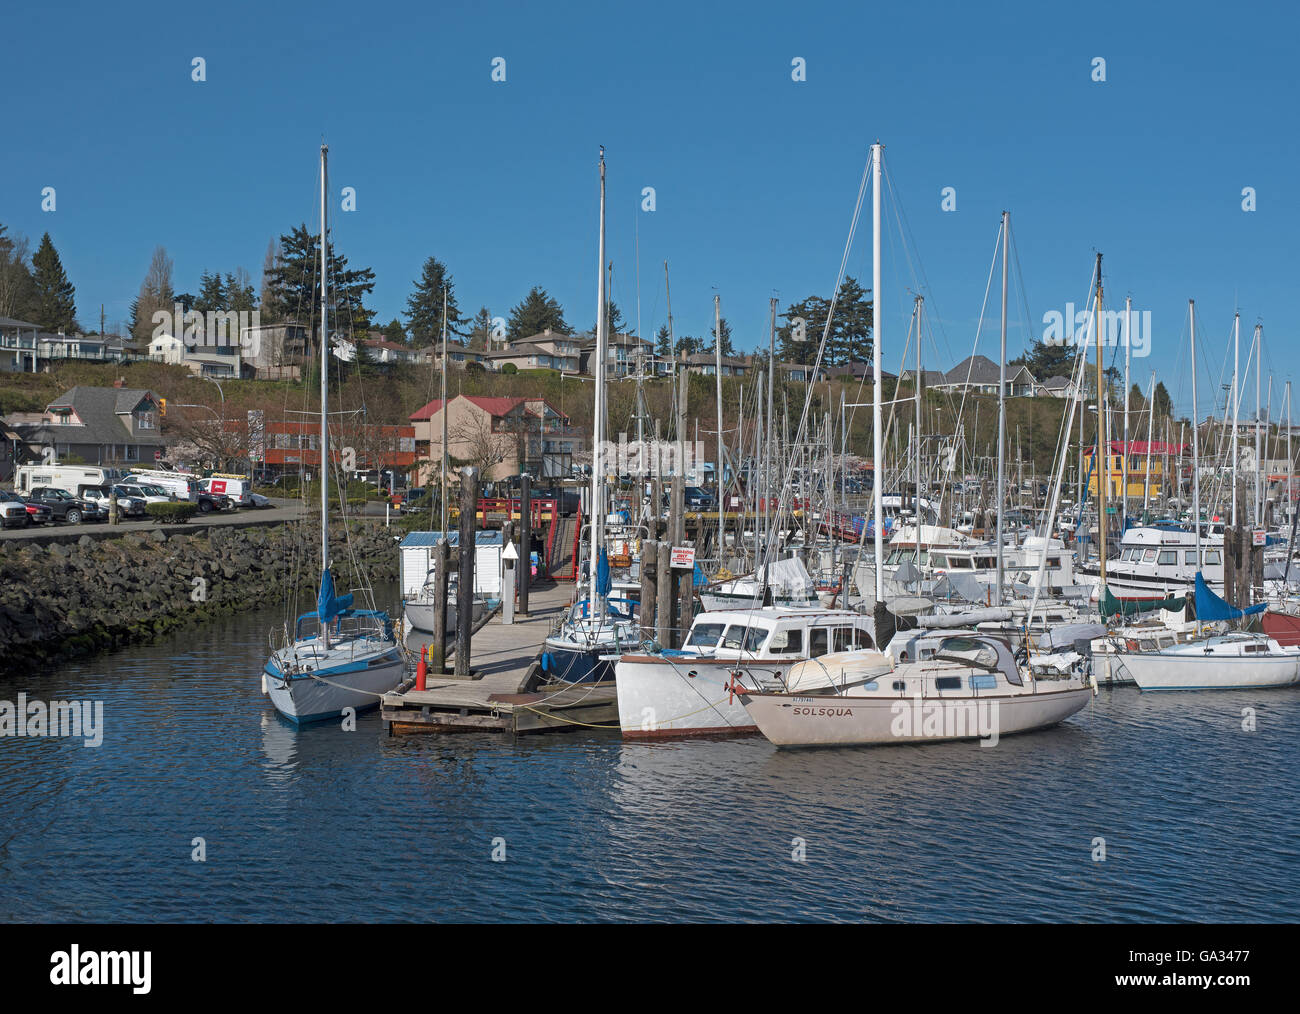 Discovery Harbour Marina located in Campbell River on the east coast of Vancouver Island, British Columbia, Canada. SCO 10,538. Stock Photo